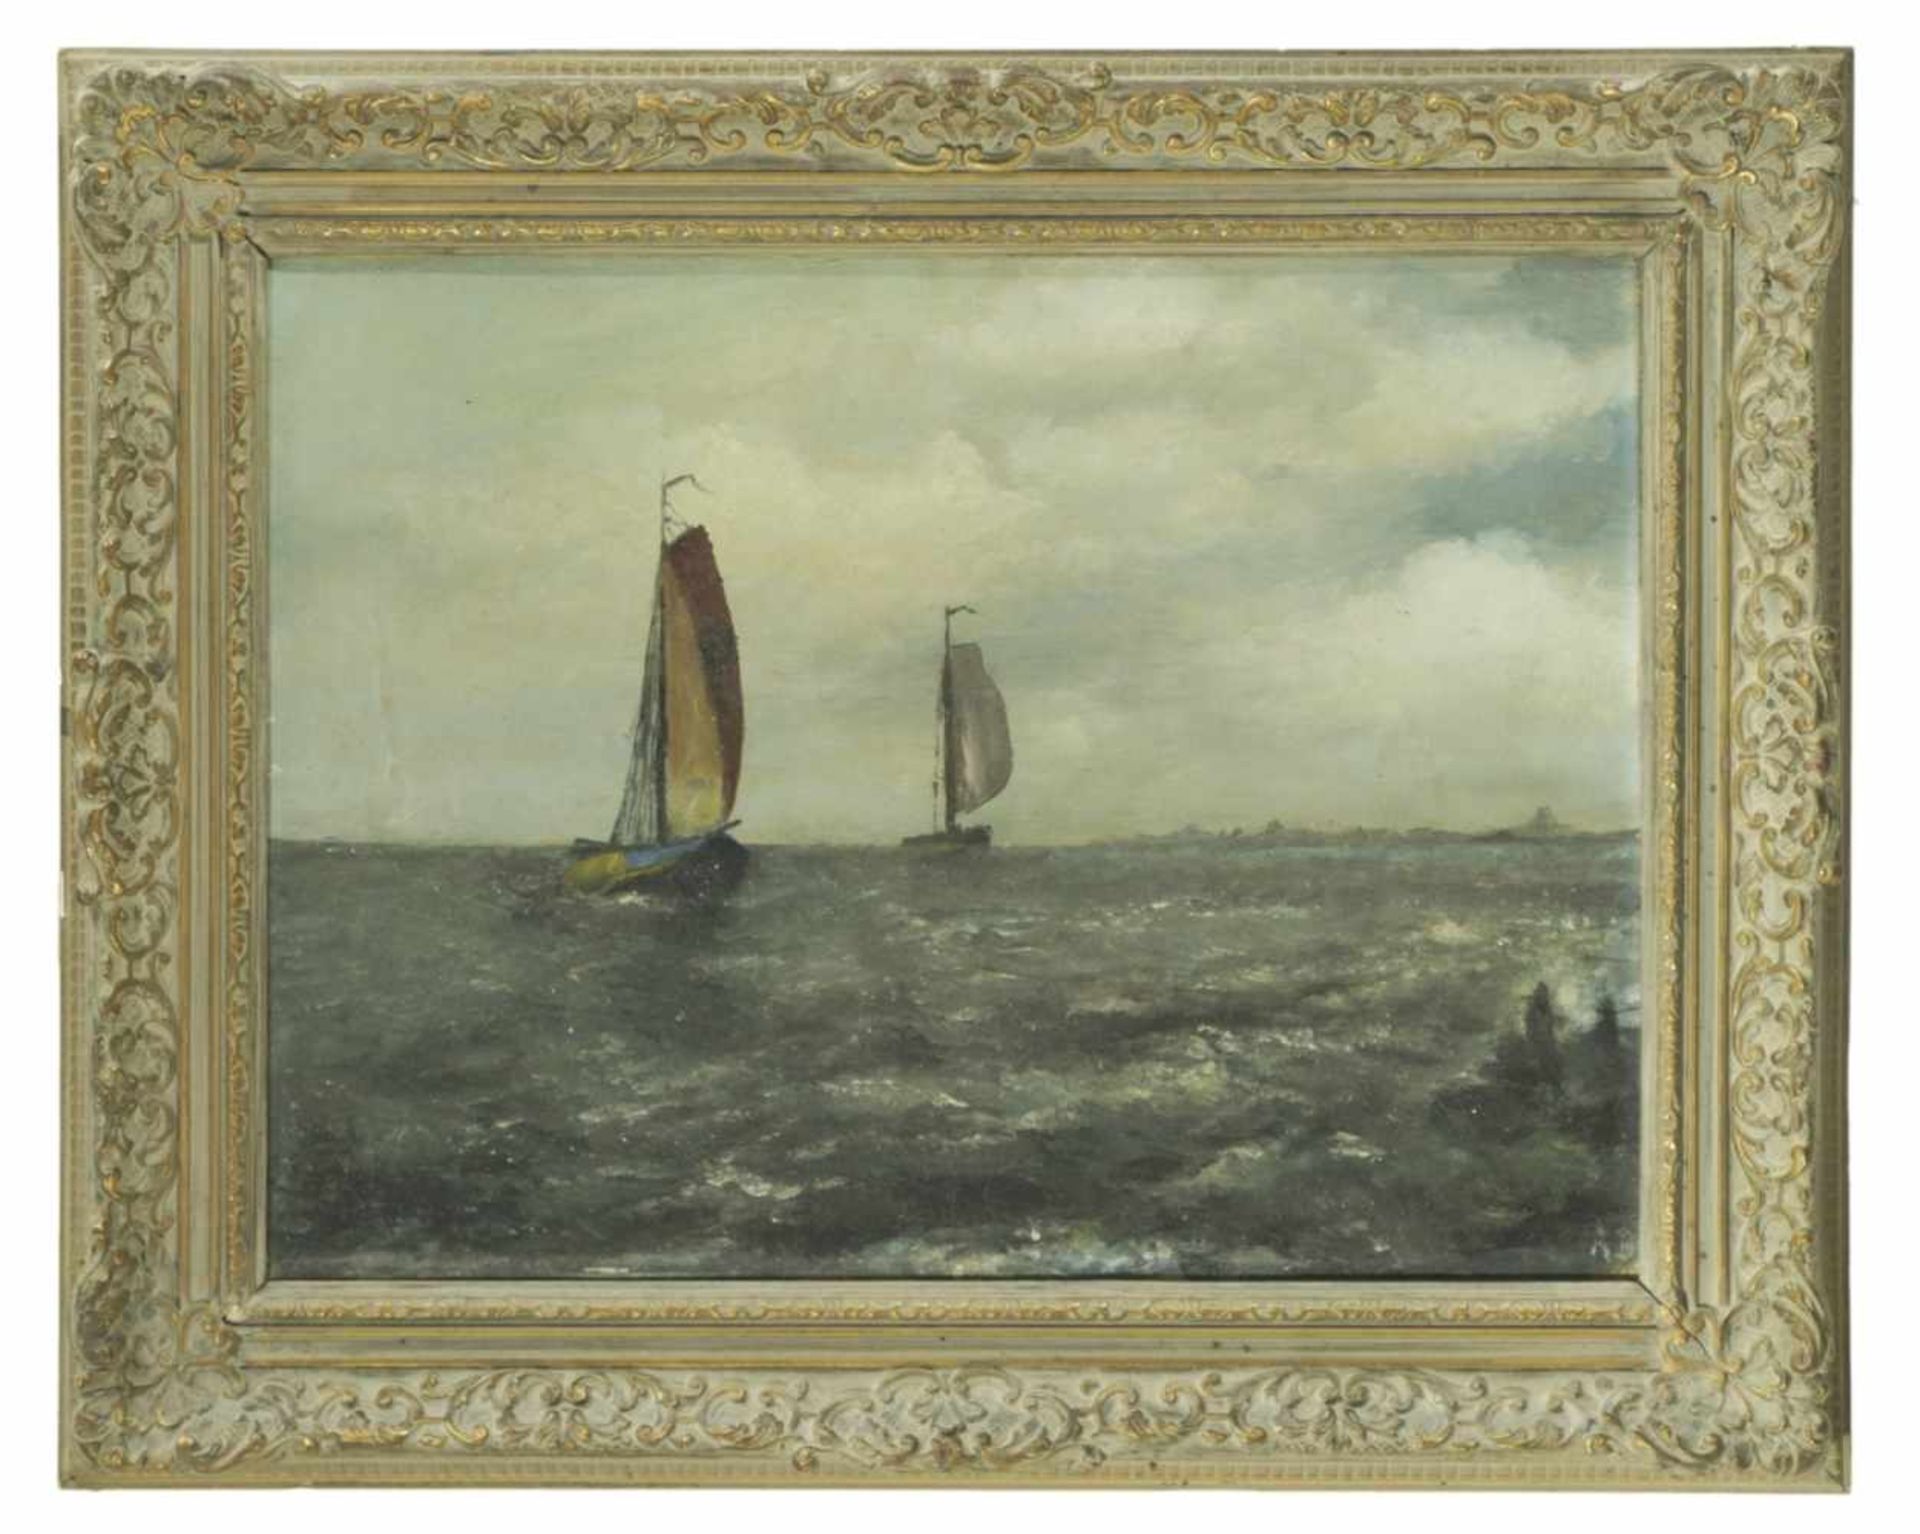 Monogramist A.B., Boats on the sea, probably Netherlands, oil on canvas, 20th c., 30 x 40 - Bild 2 aus 2